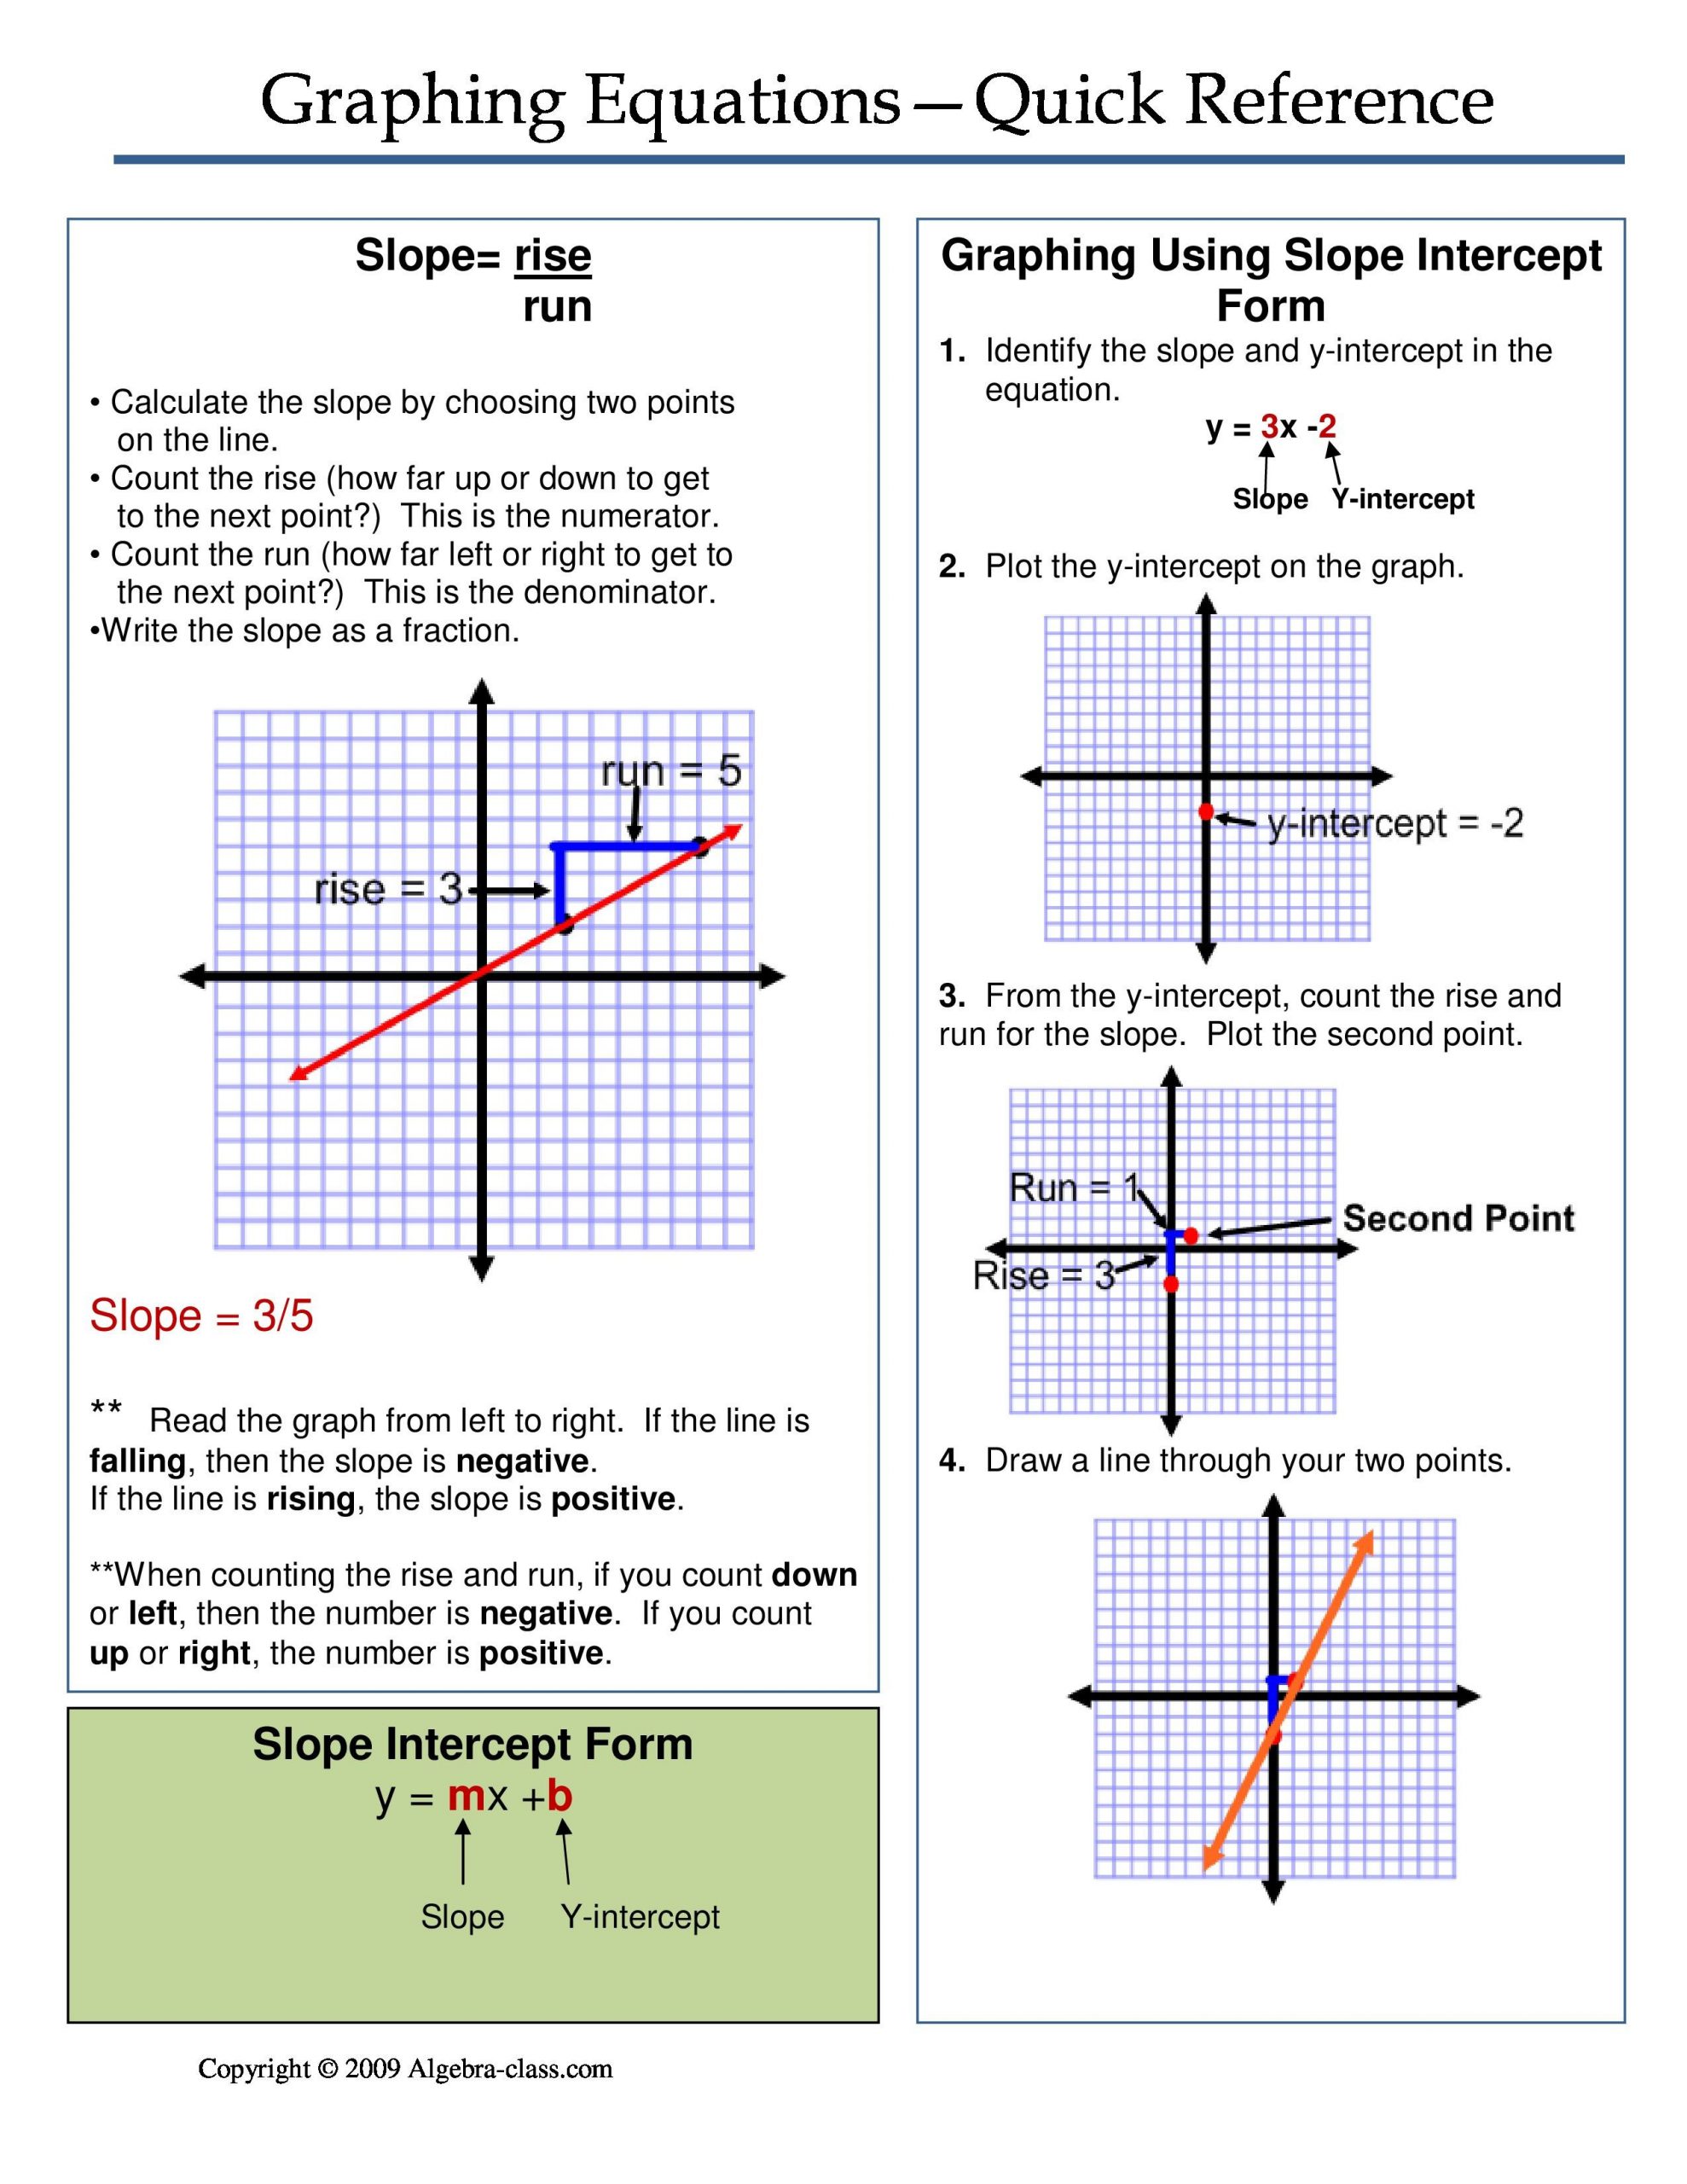 Graphing Linear Equations Practice Worksheet E Page Notes Worksheet for the Graphing Equations Unit